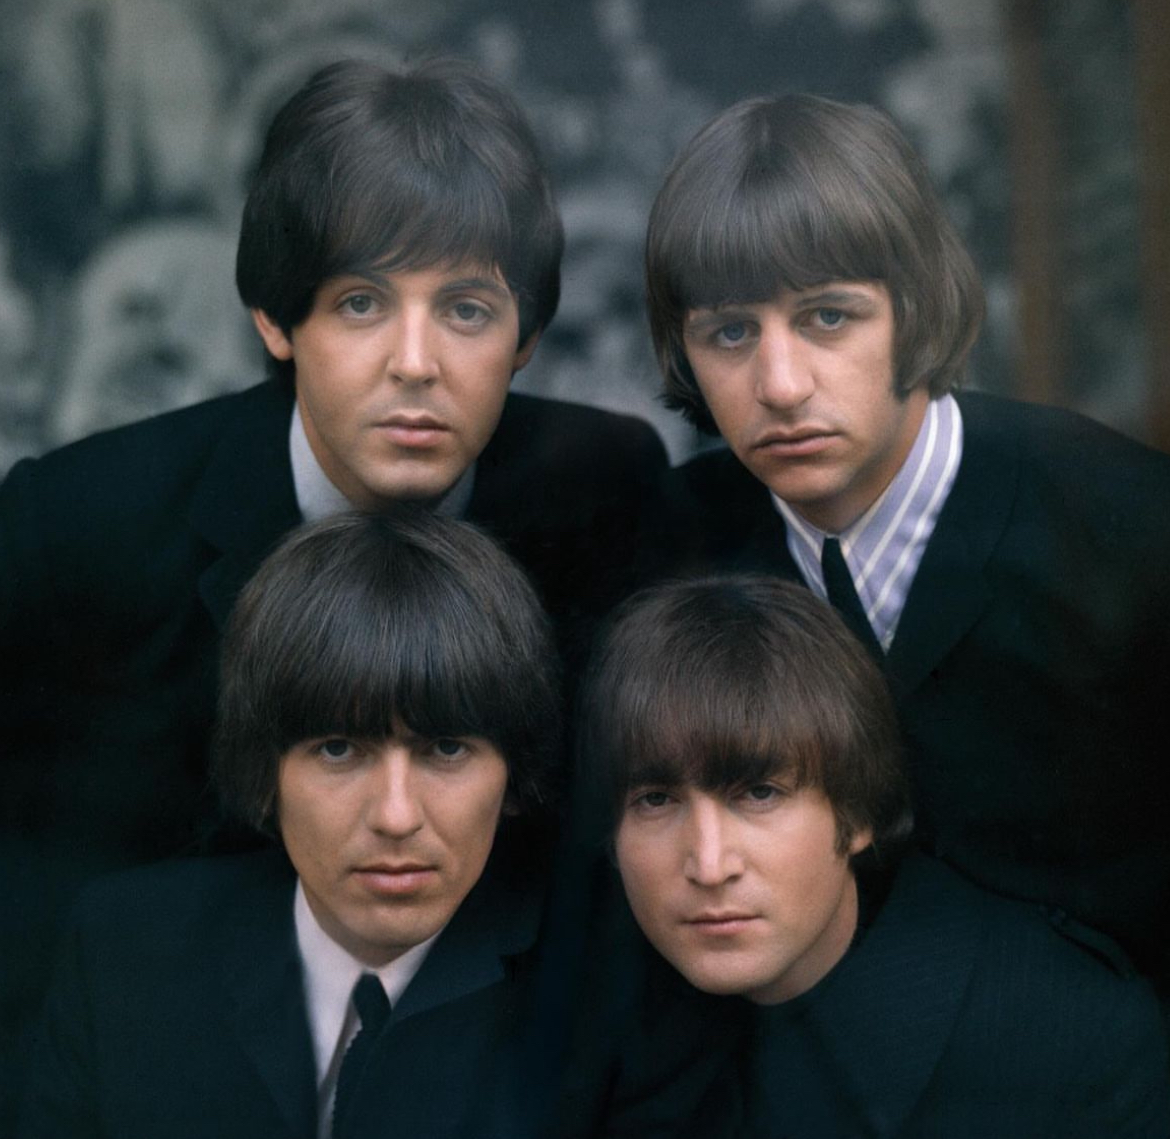 The Sole Masterpiece: The Only Painting Crafted By All Four Beatles, With An Estimated $600,000 Value, Heads To Auction 